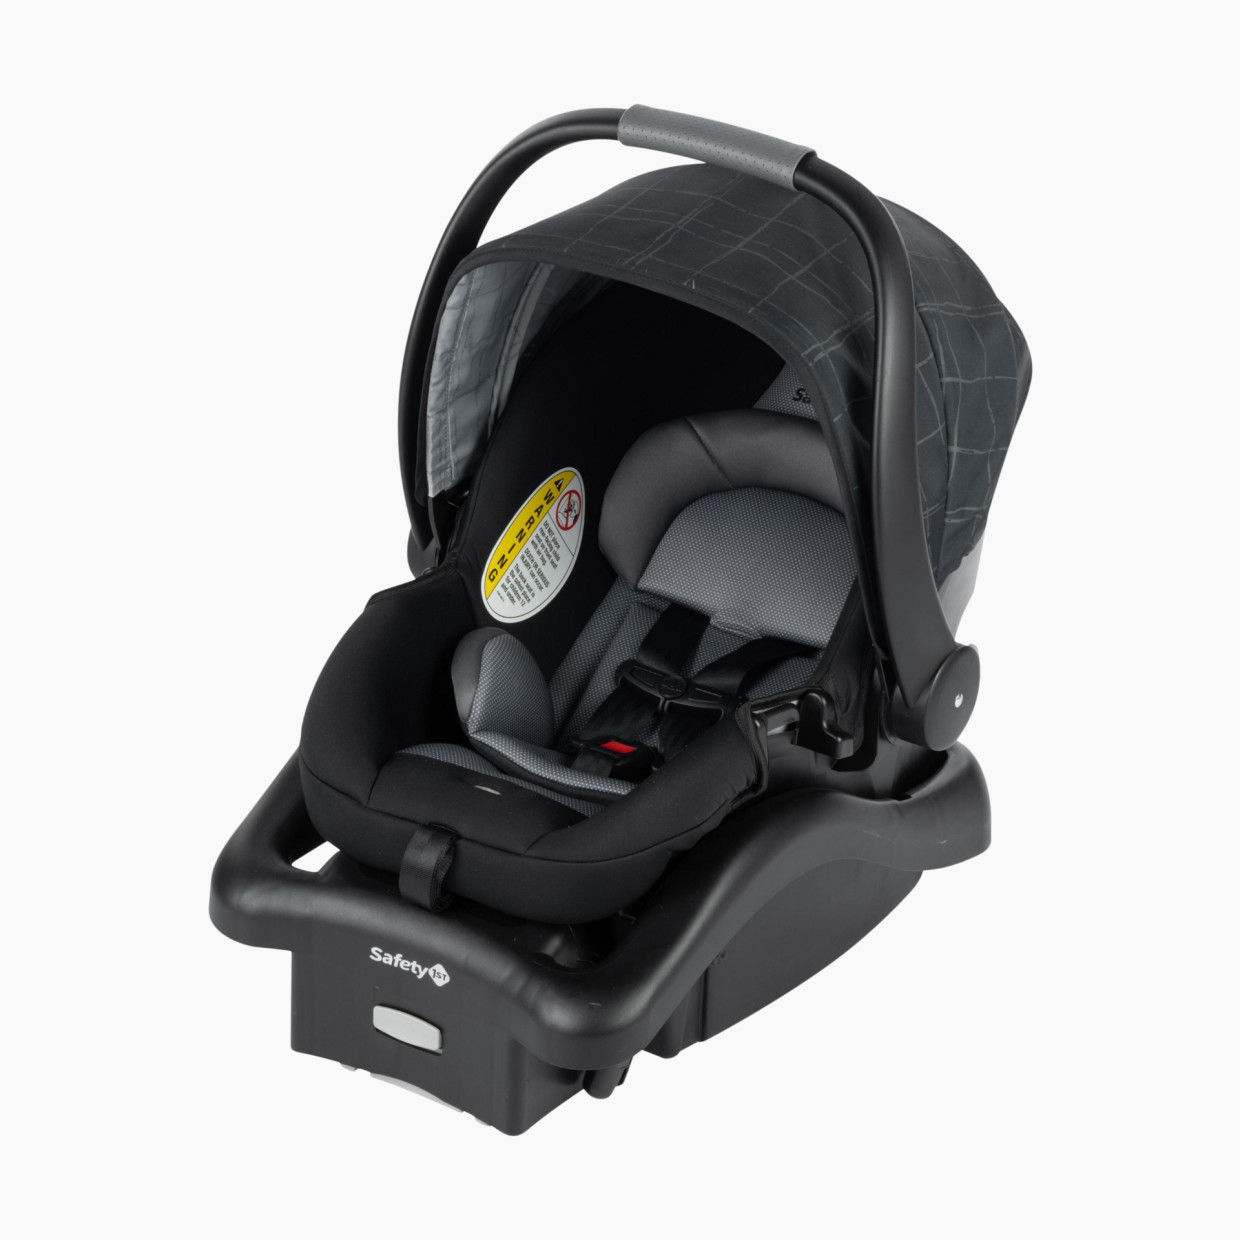 Safety 1st onBoard 35 SecureTech Infant Car Seat - High Street.